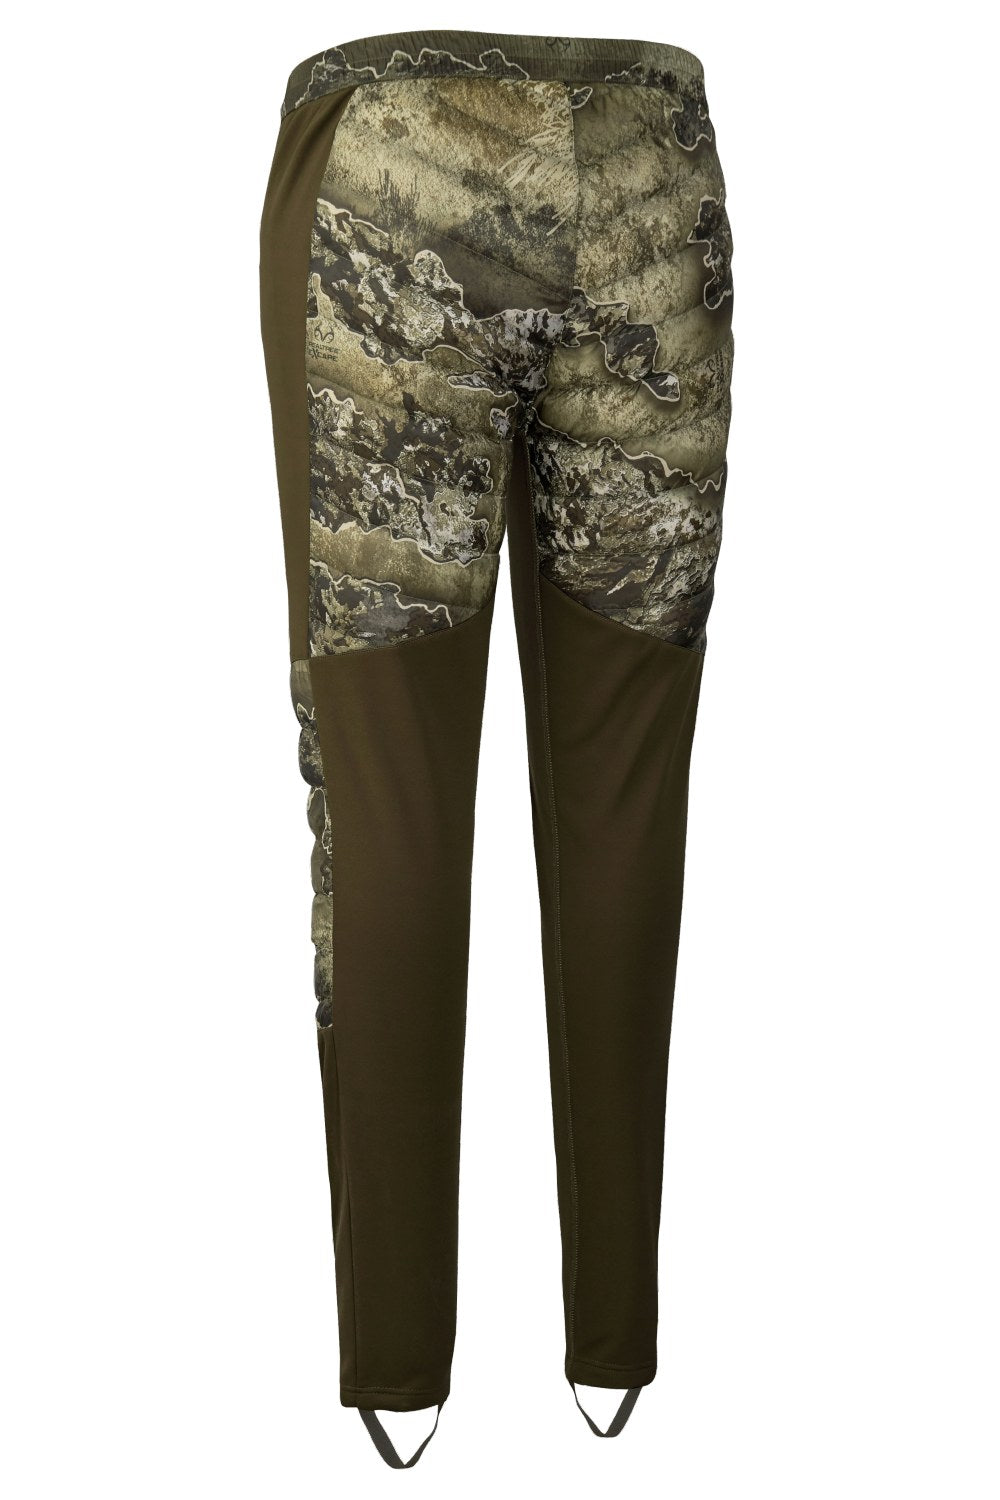 Deerhunter Excape Quilted Trousers in Realtree Excape 